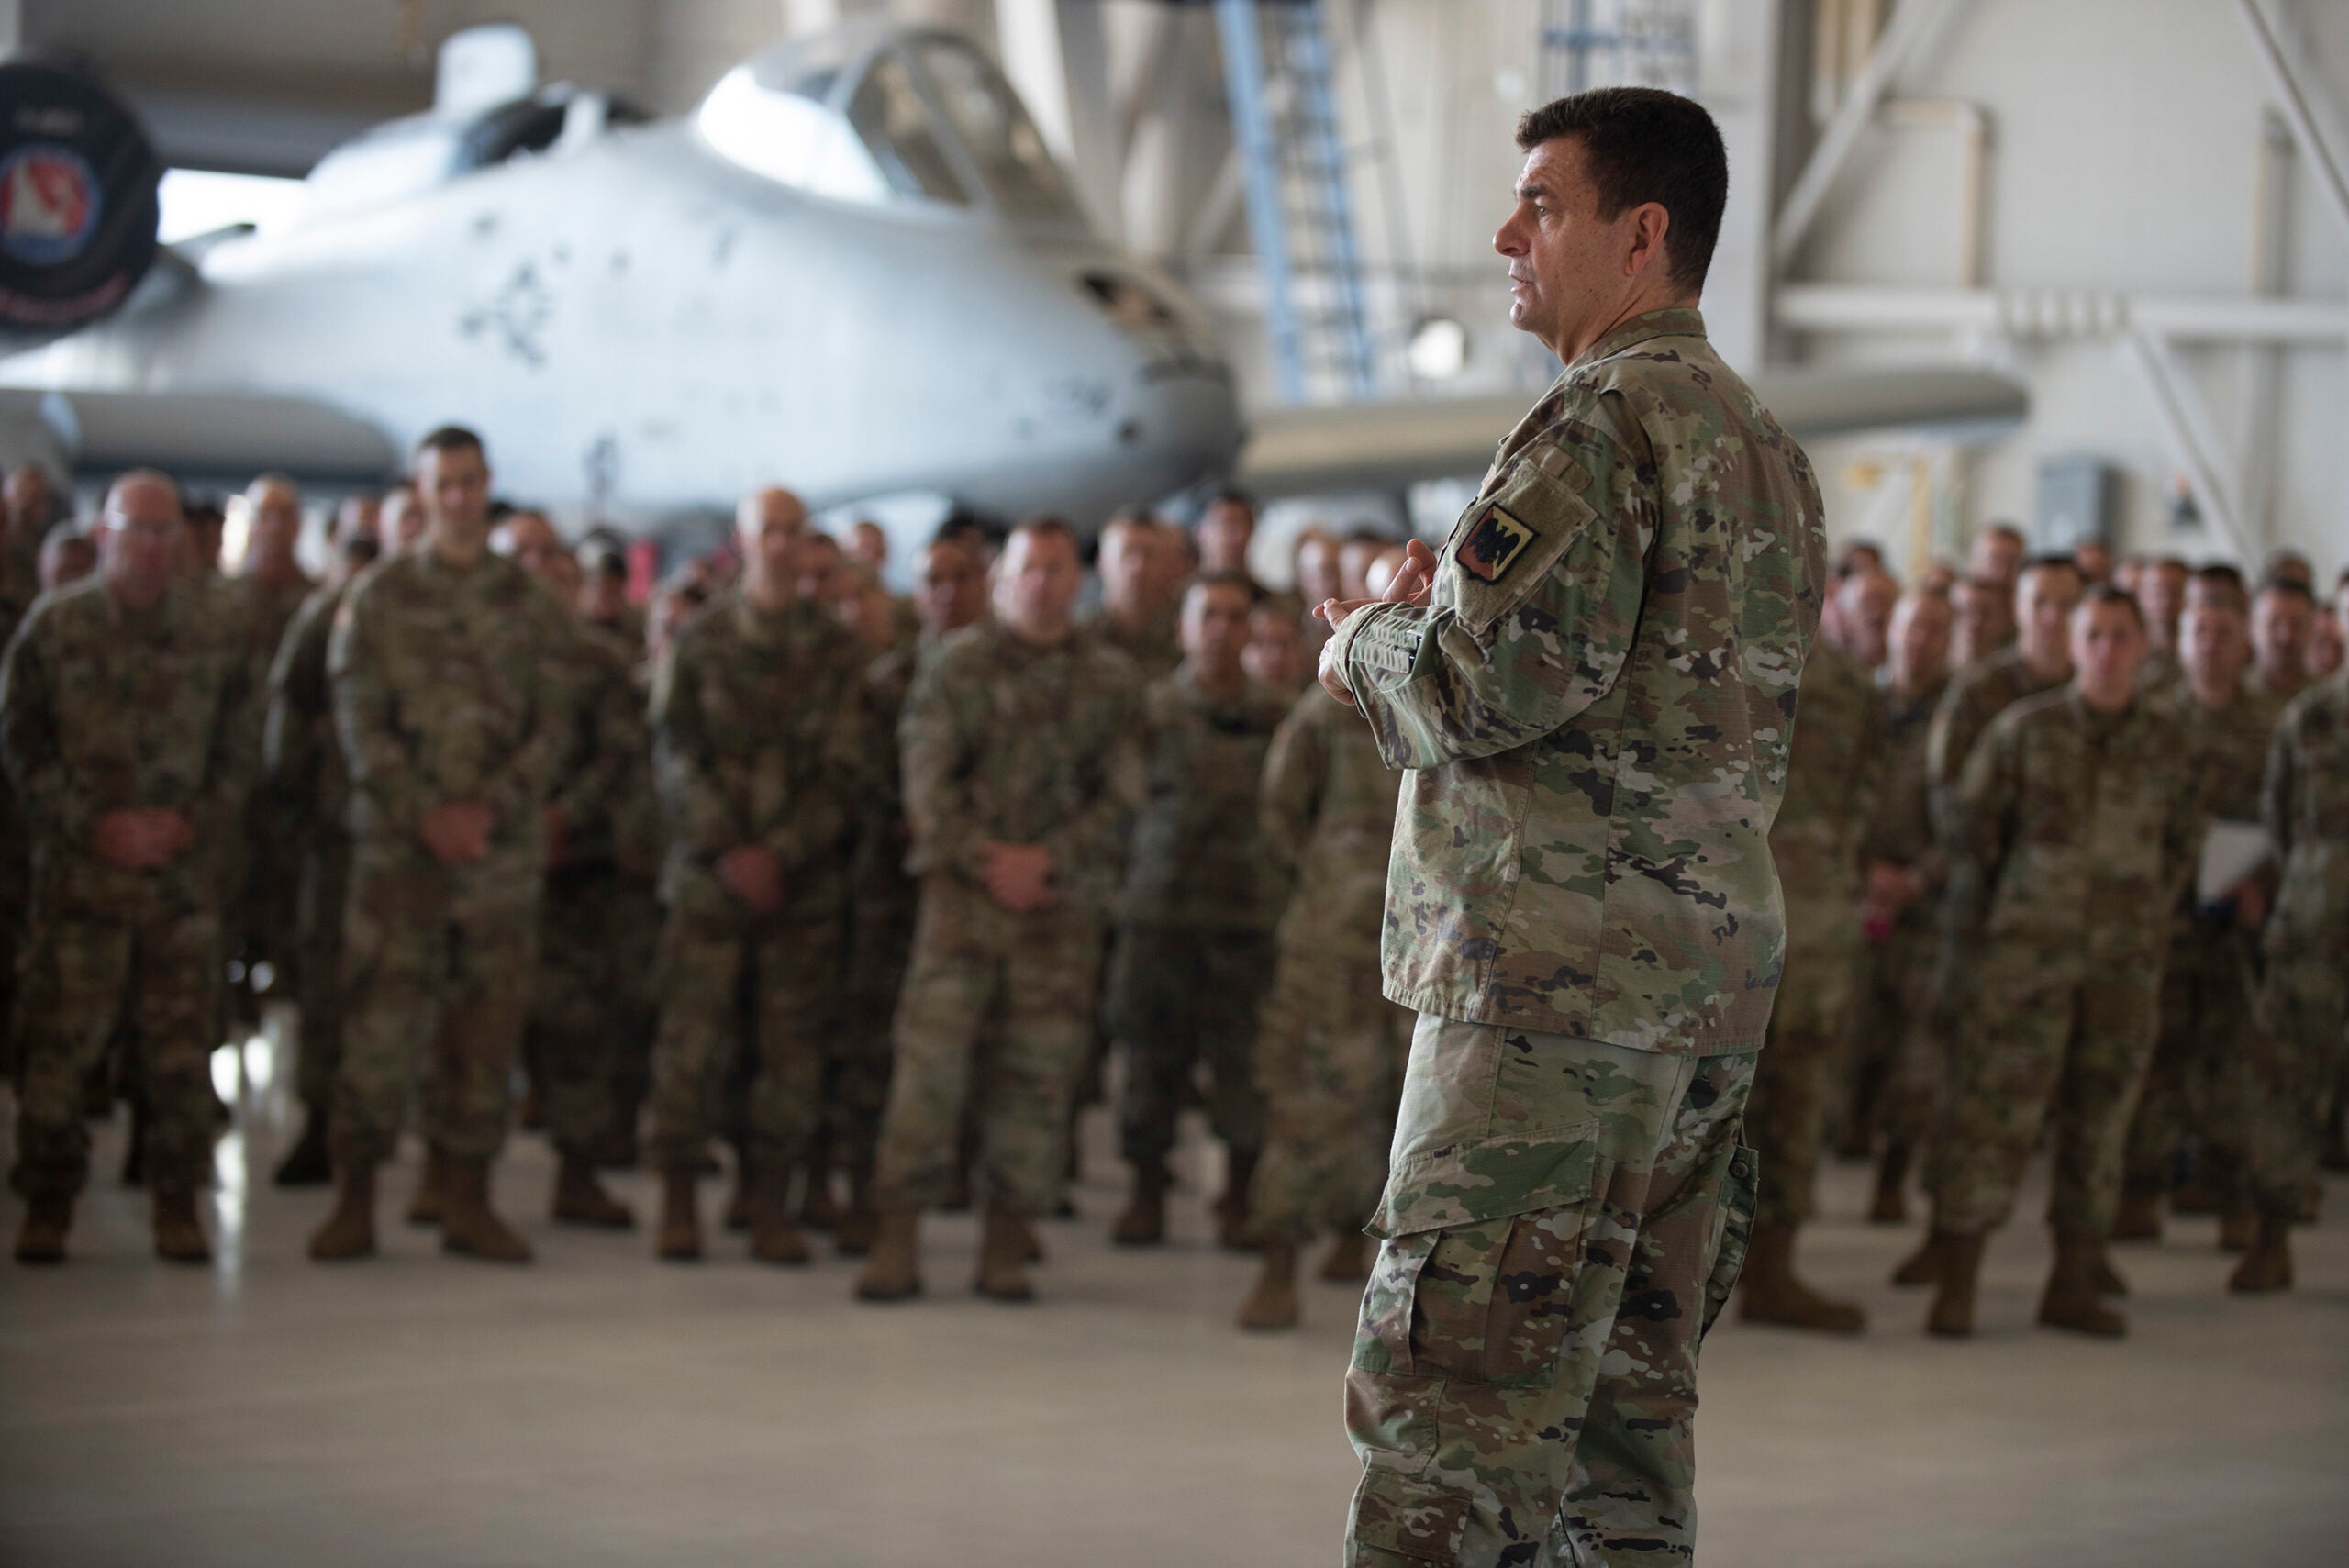 U.S. Air Force Lt. Gen. Michael Loh, director, Air National Guard, speaks to Airmen with the 124th Fighter Wing, Idaho National Guard at Gowen Field, Boise, Idaho, Aug. 20, 2022. While addressing the Airmen he outlined five of his priorities and took candid questions from the audience. (U.S. Air National Guard photo by Master Sgt. Becky Vanshur)